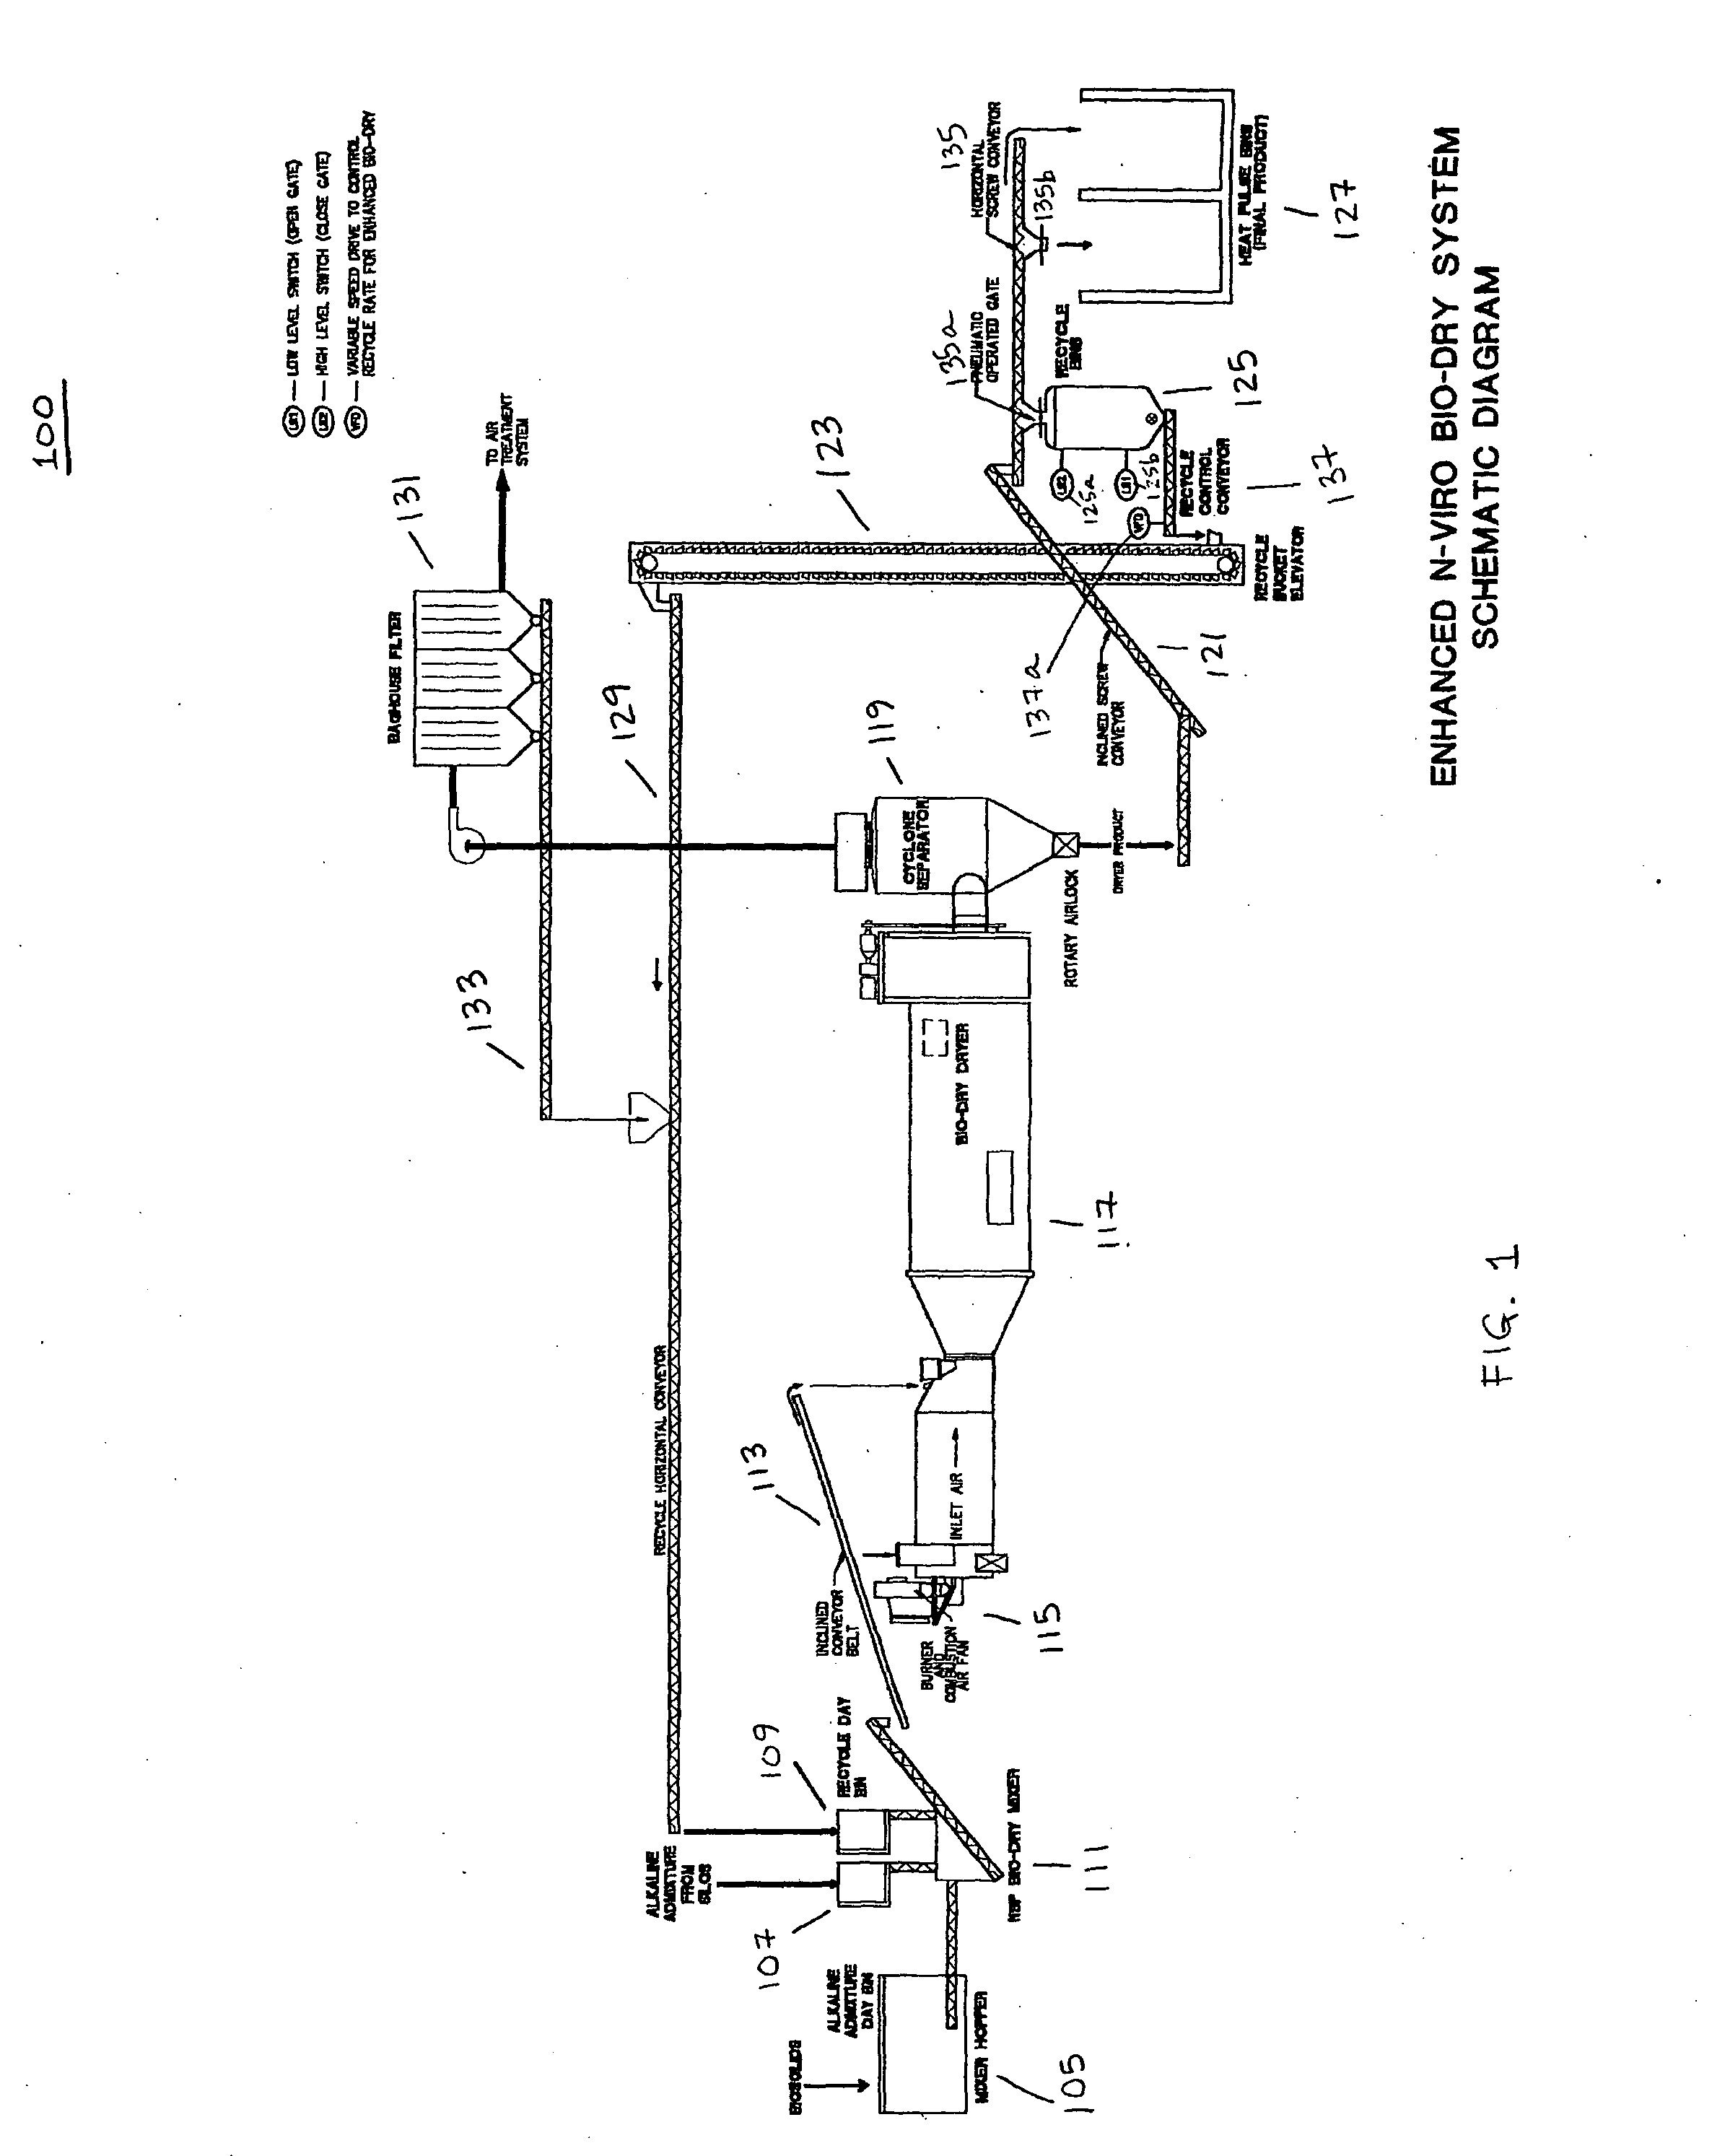 Method and system for treating sludge using recycle